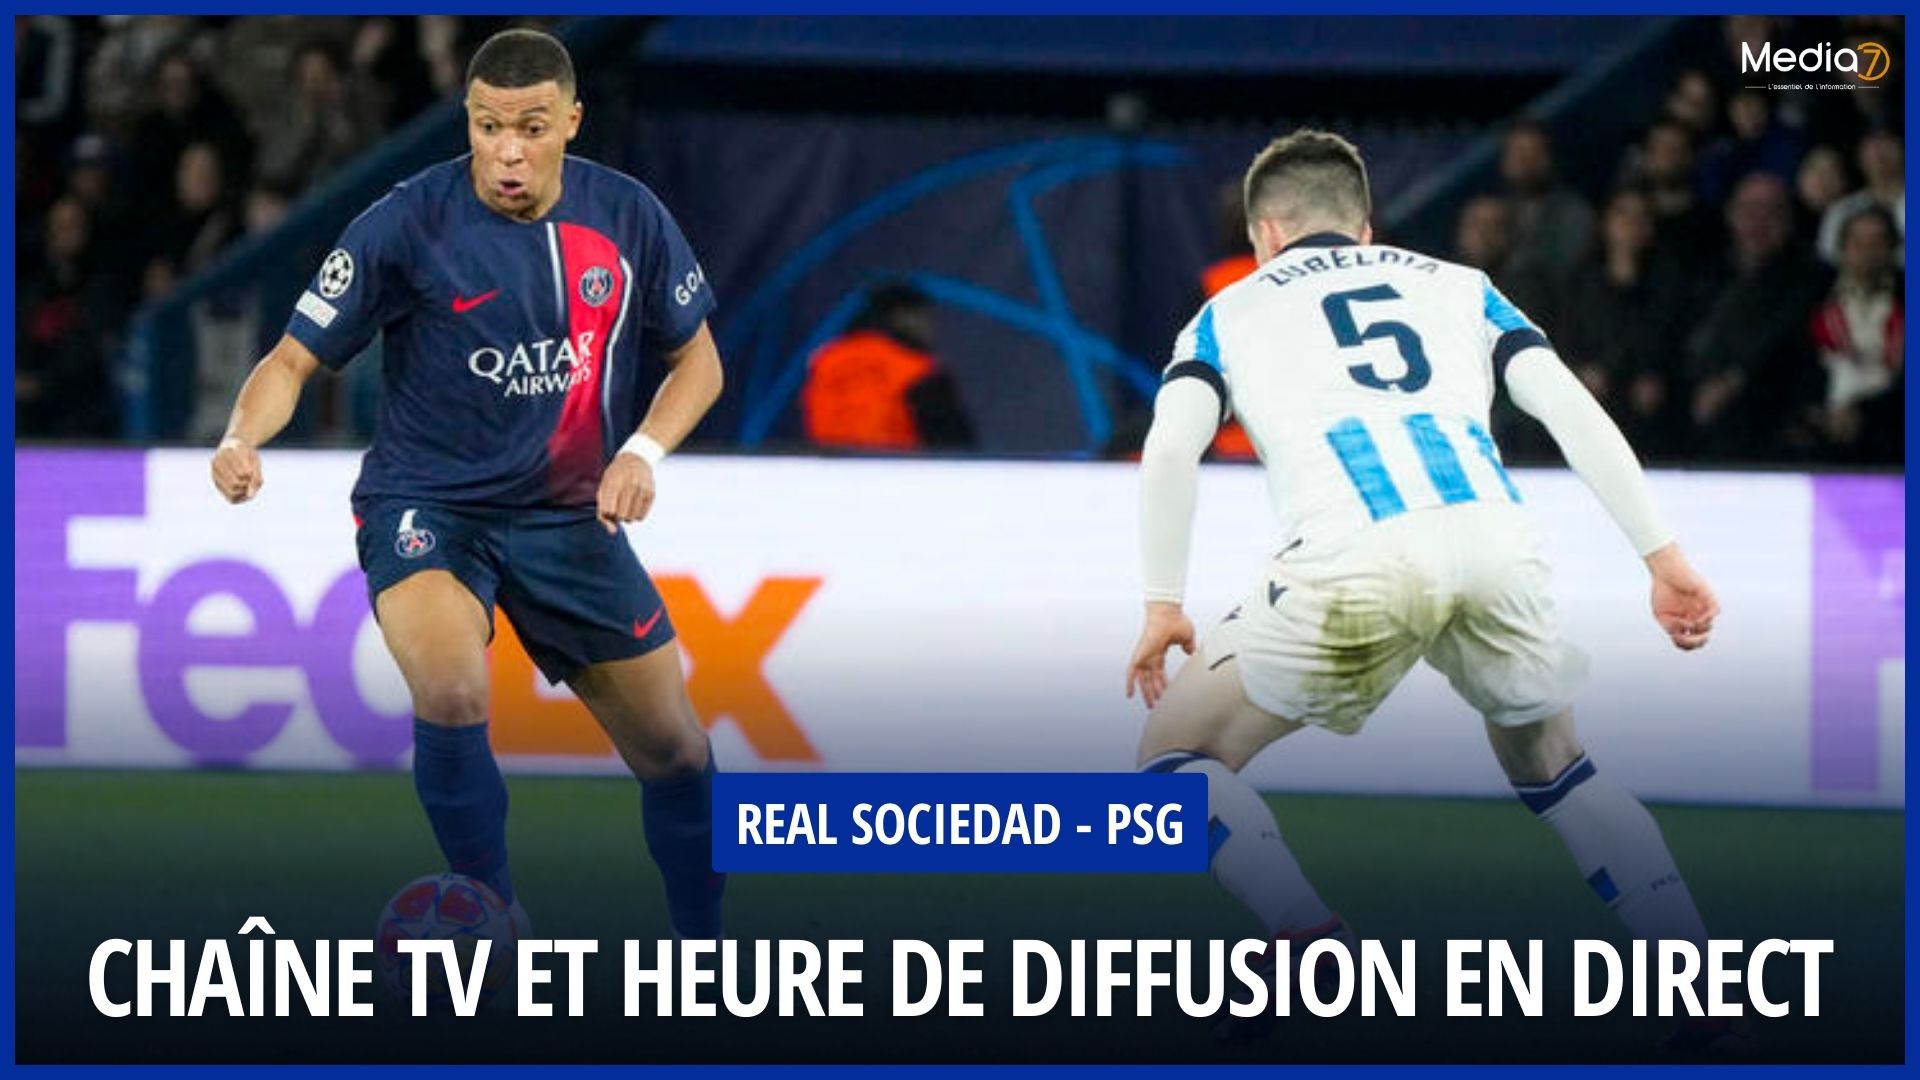 Real Sociedad - PSG Match Live: TV Channel and Broadcast Time - Media7